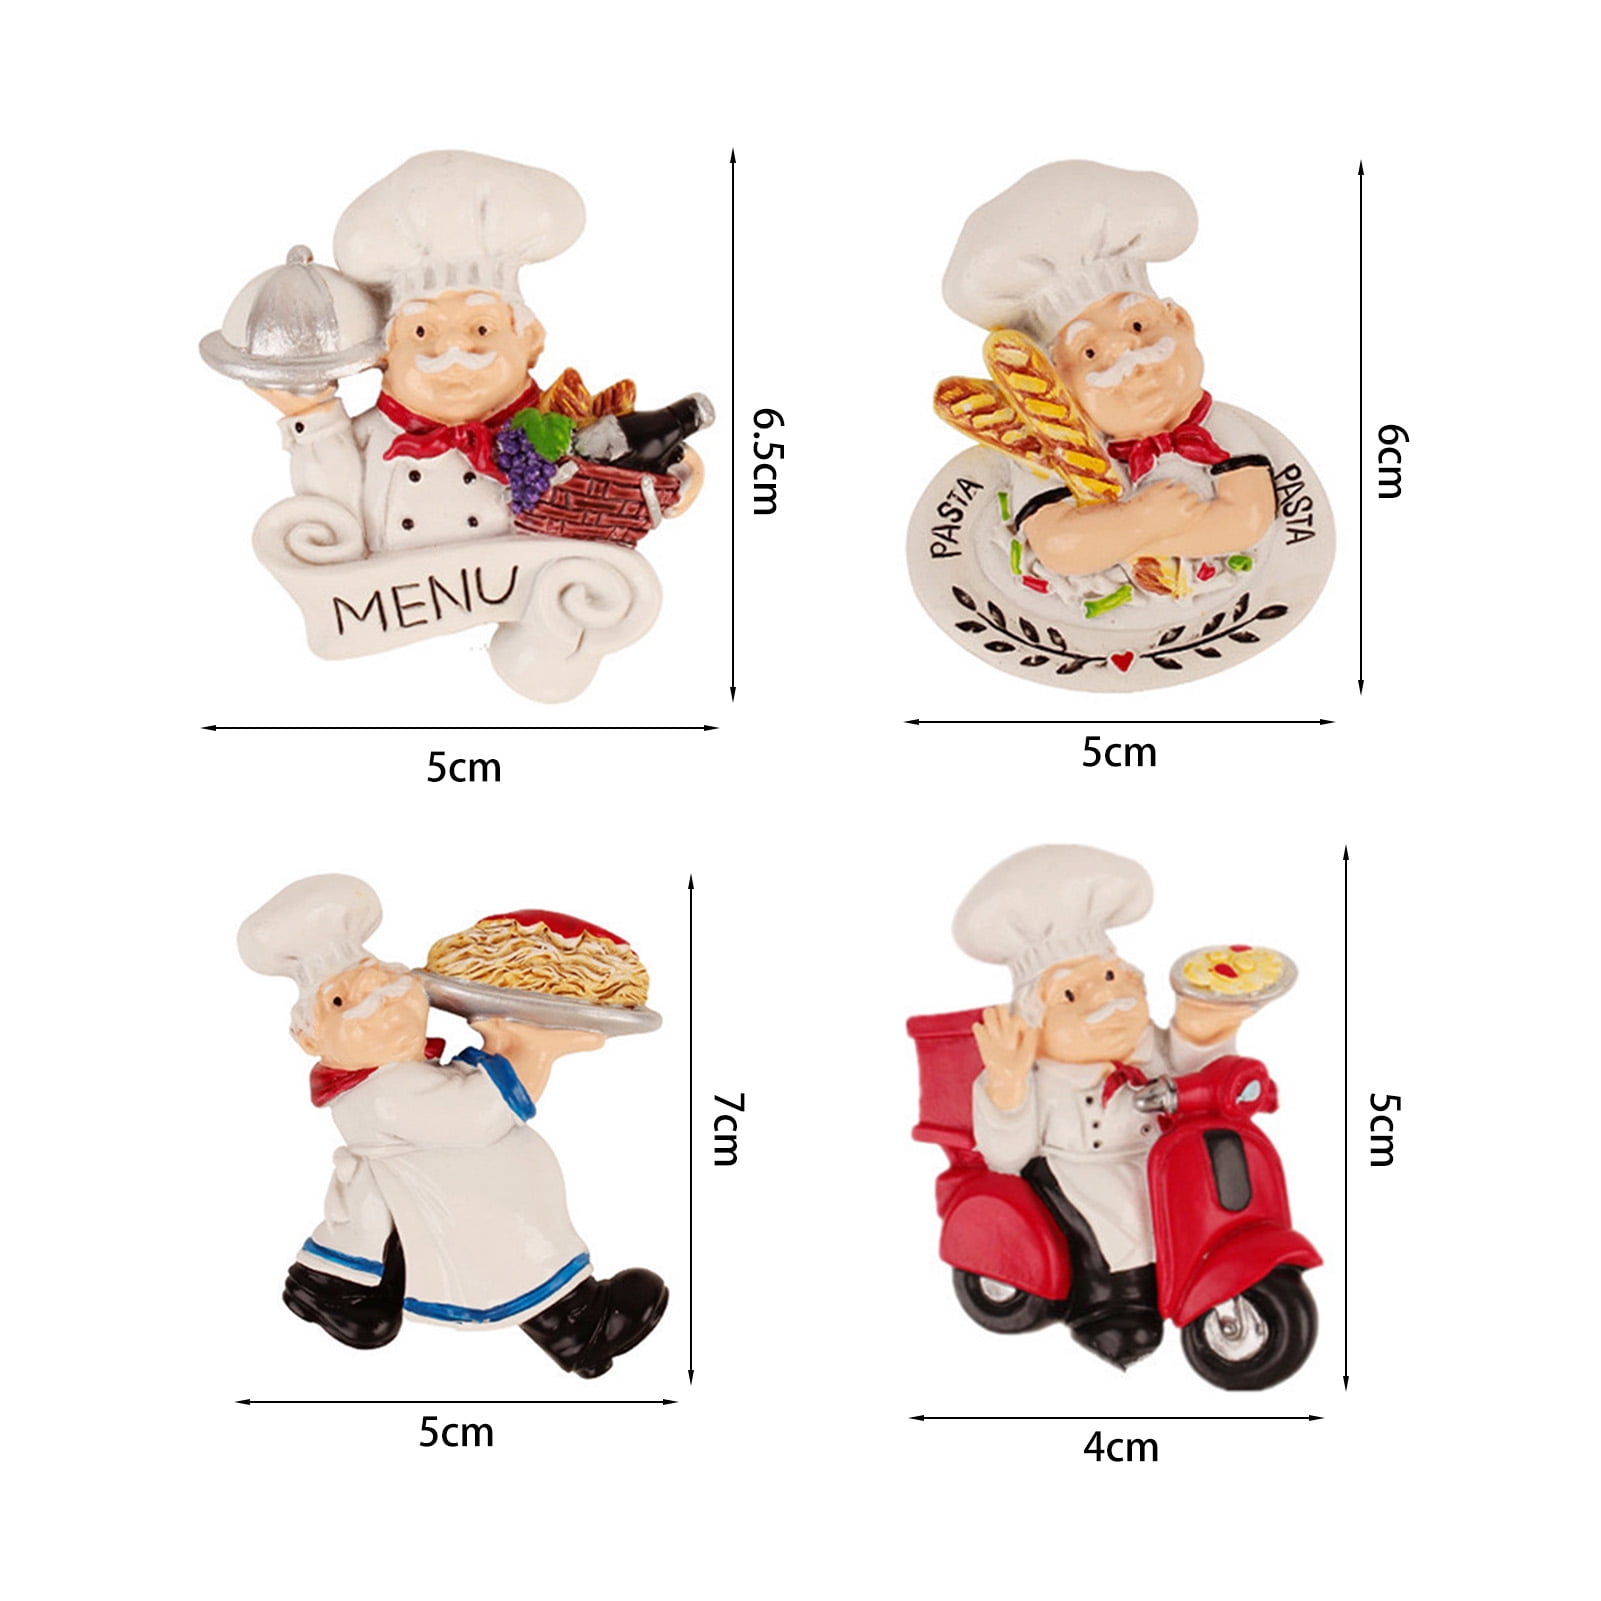 3" Details about   1 RESIN 3D Fridge Magnet BLUE FAT CHEF WITH TOWEL approx 